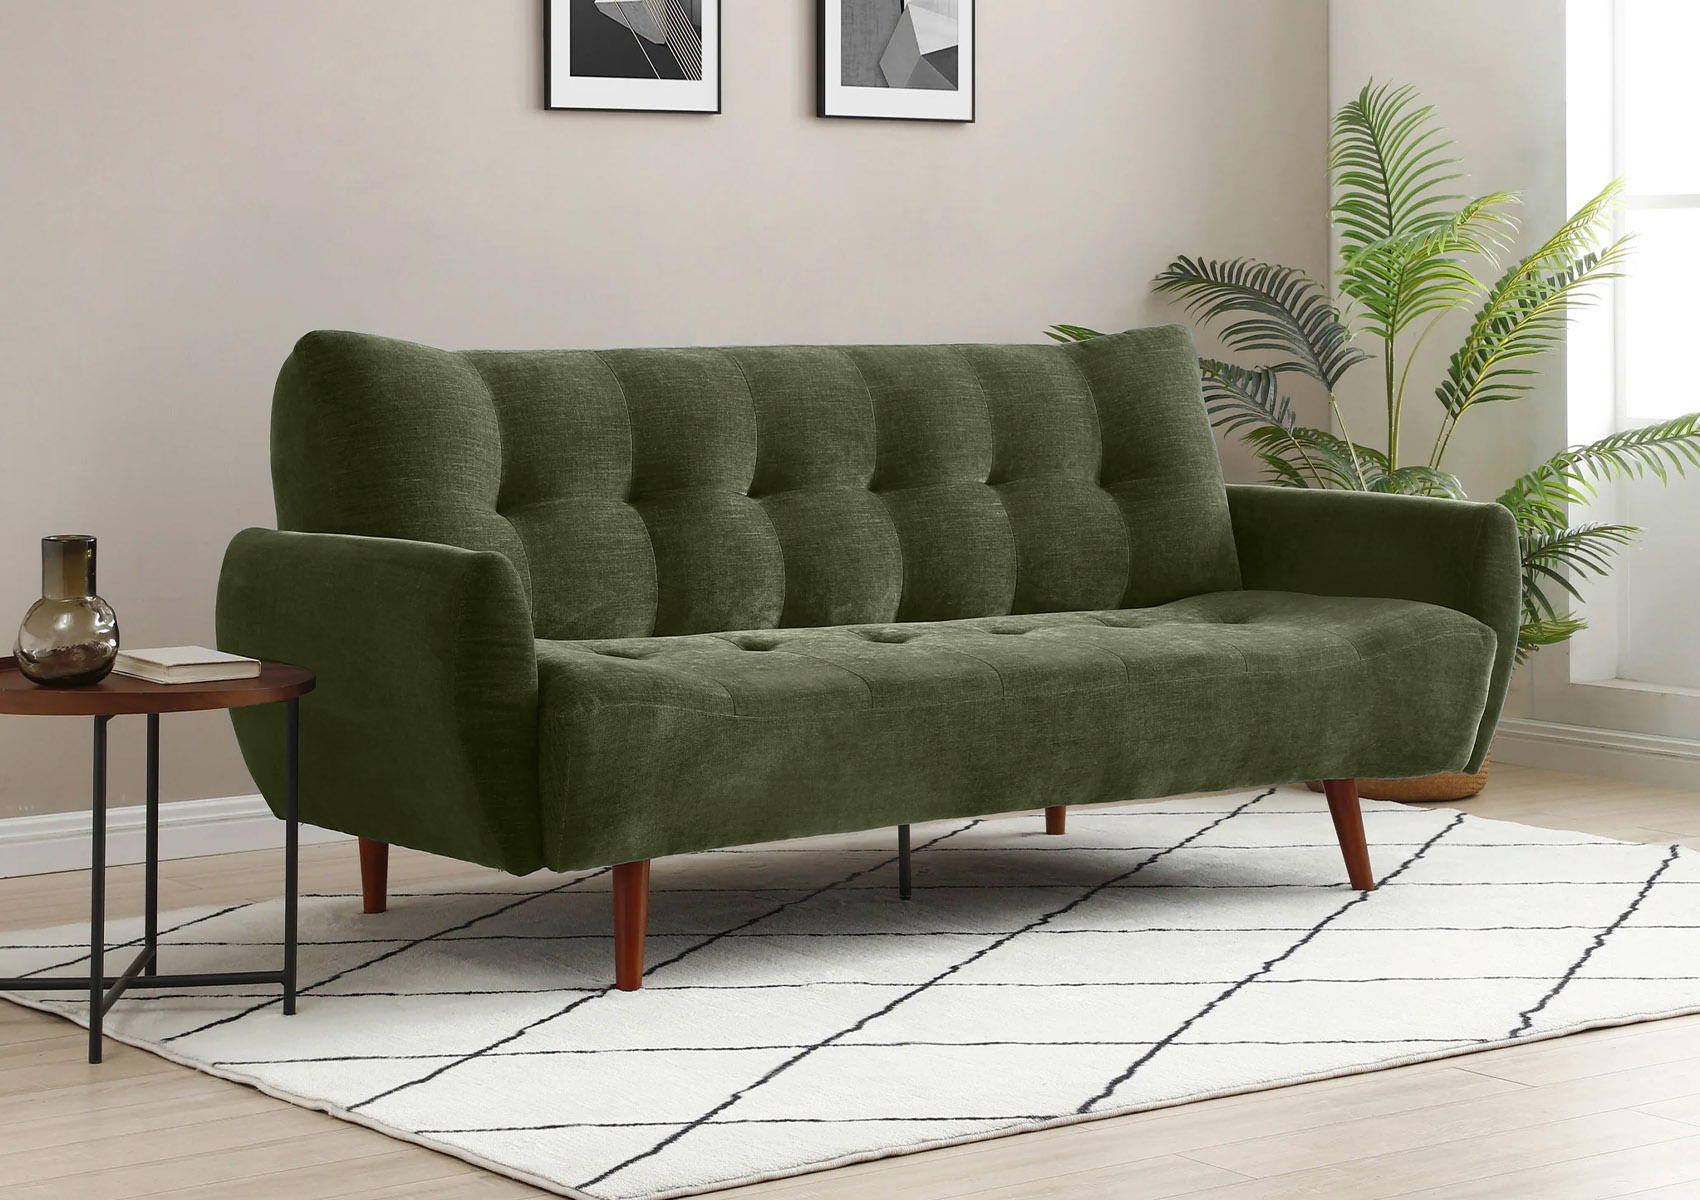 View Oasis Olive Green Sofa Bed Time4Sleep information